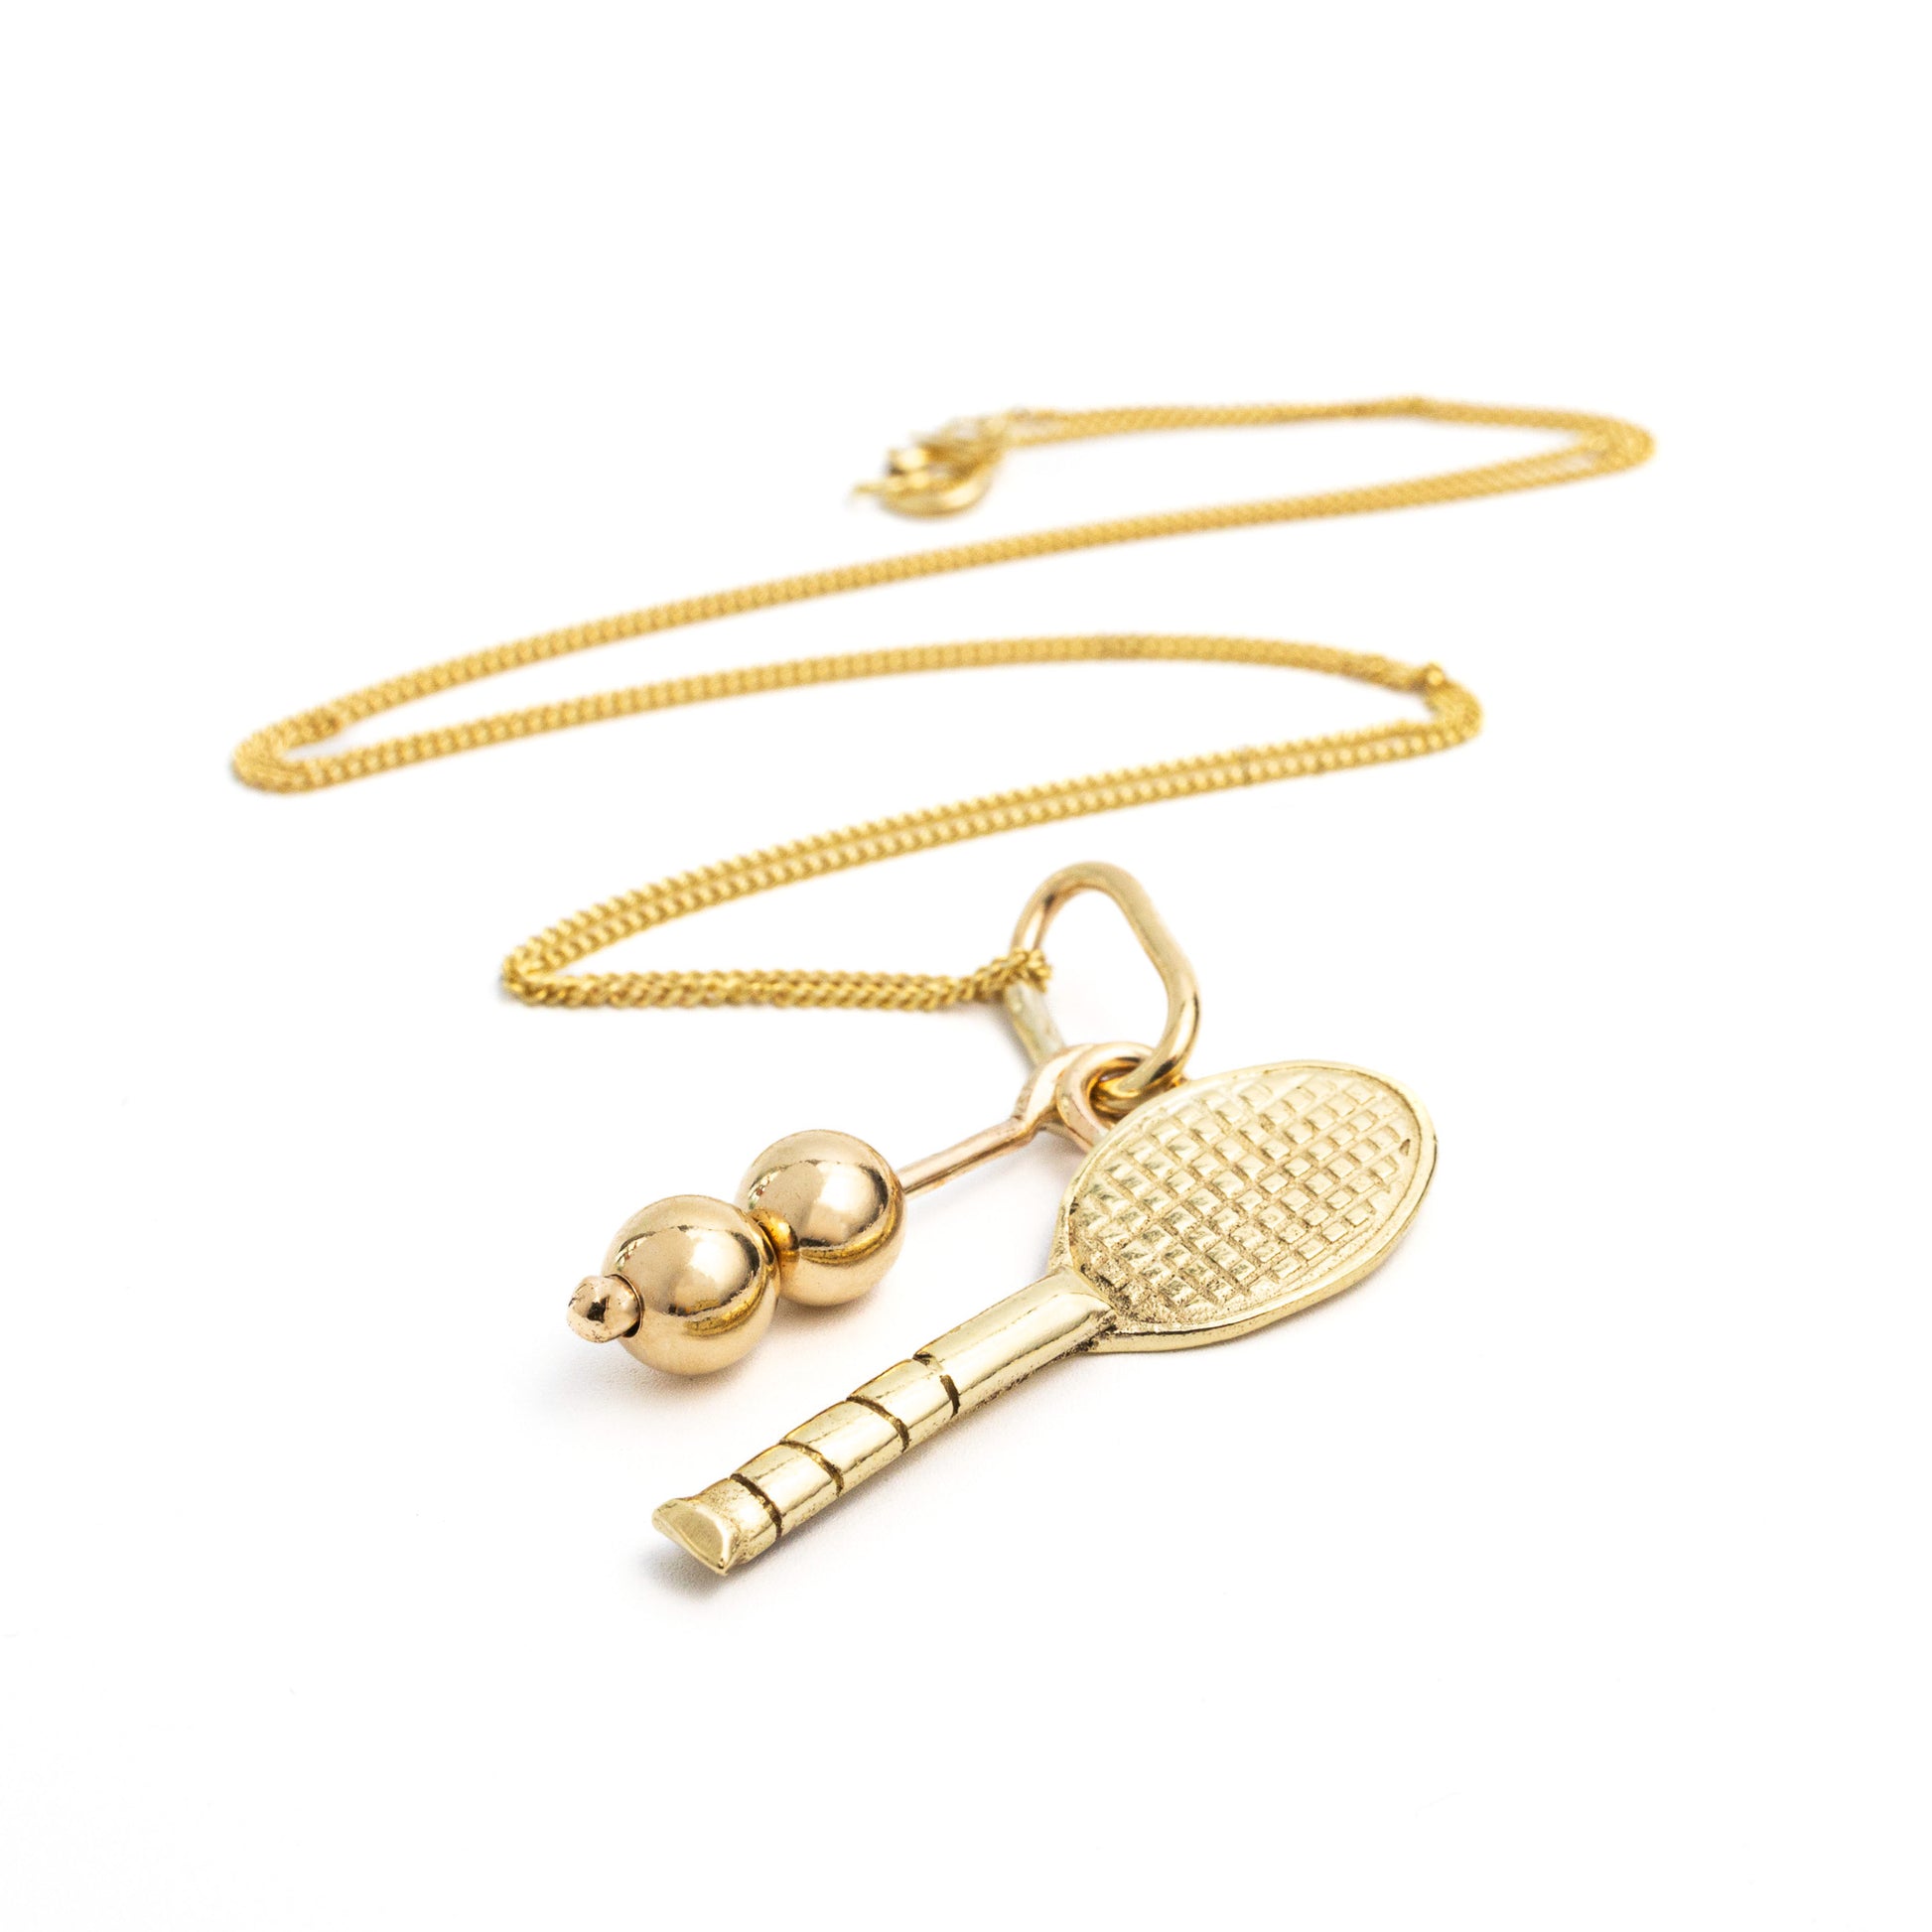 9ct gold Great serve tennis necklace